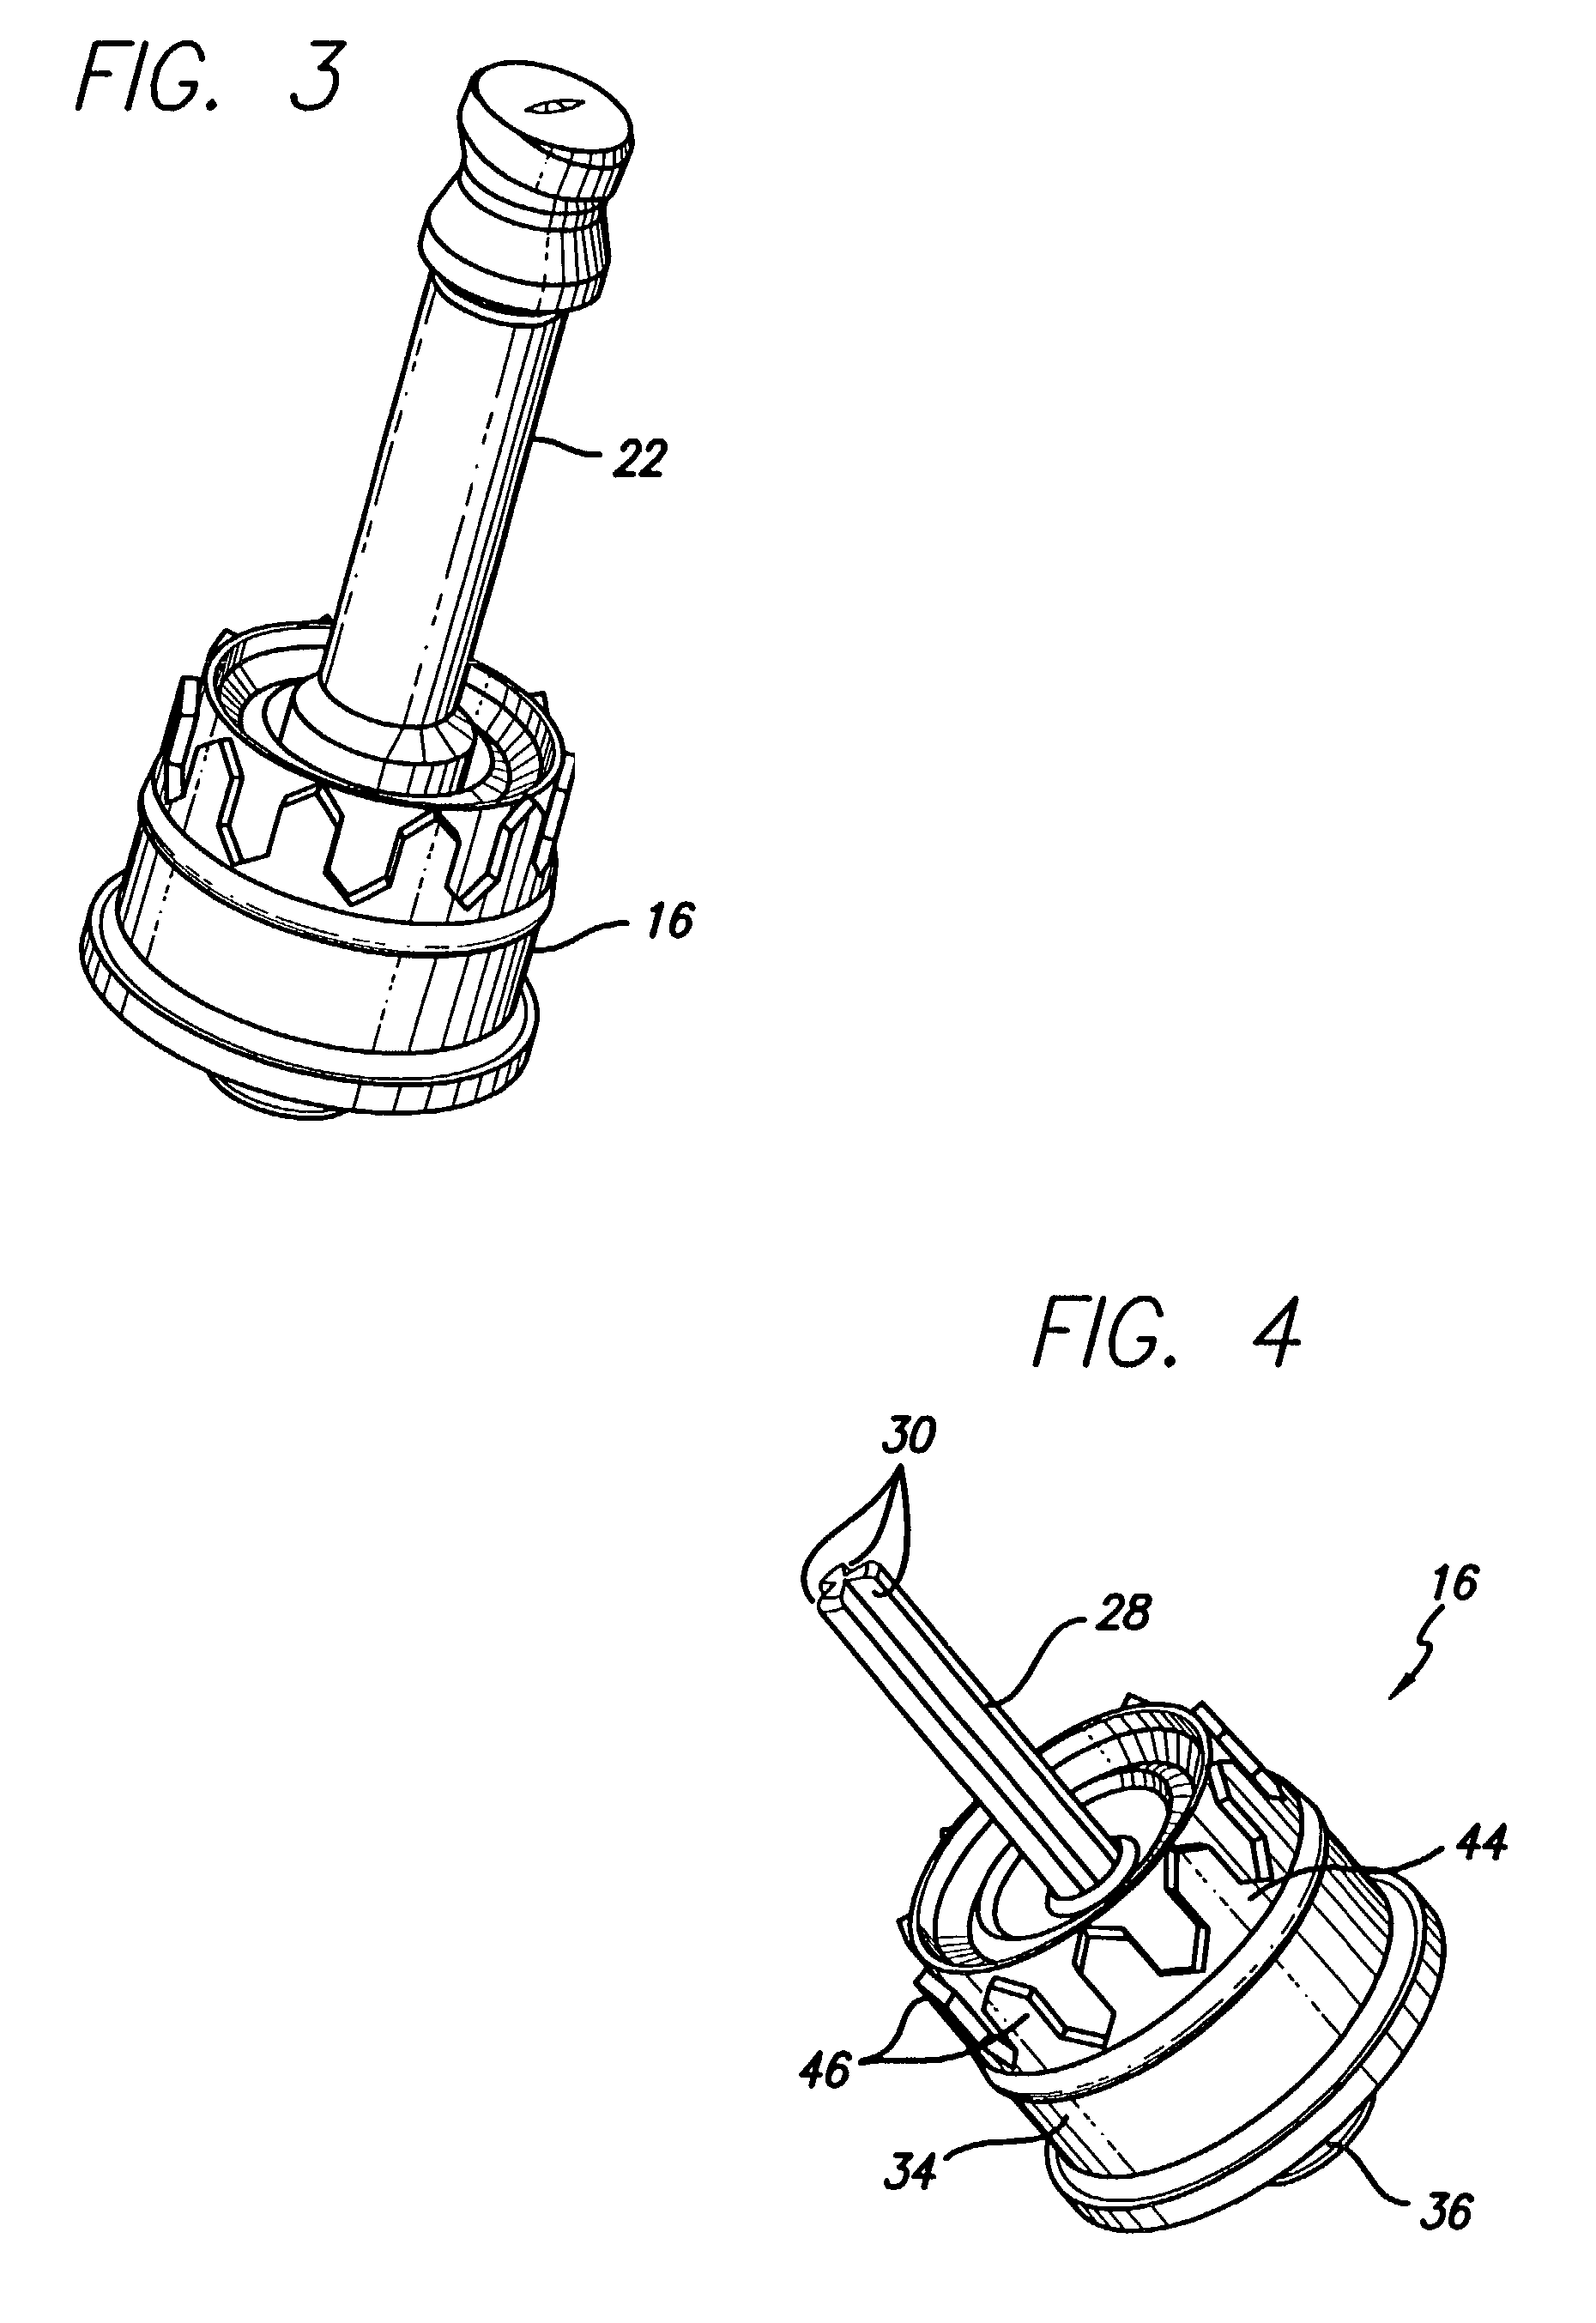 Needleless medical connector with expandable valve mechanism